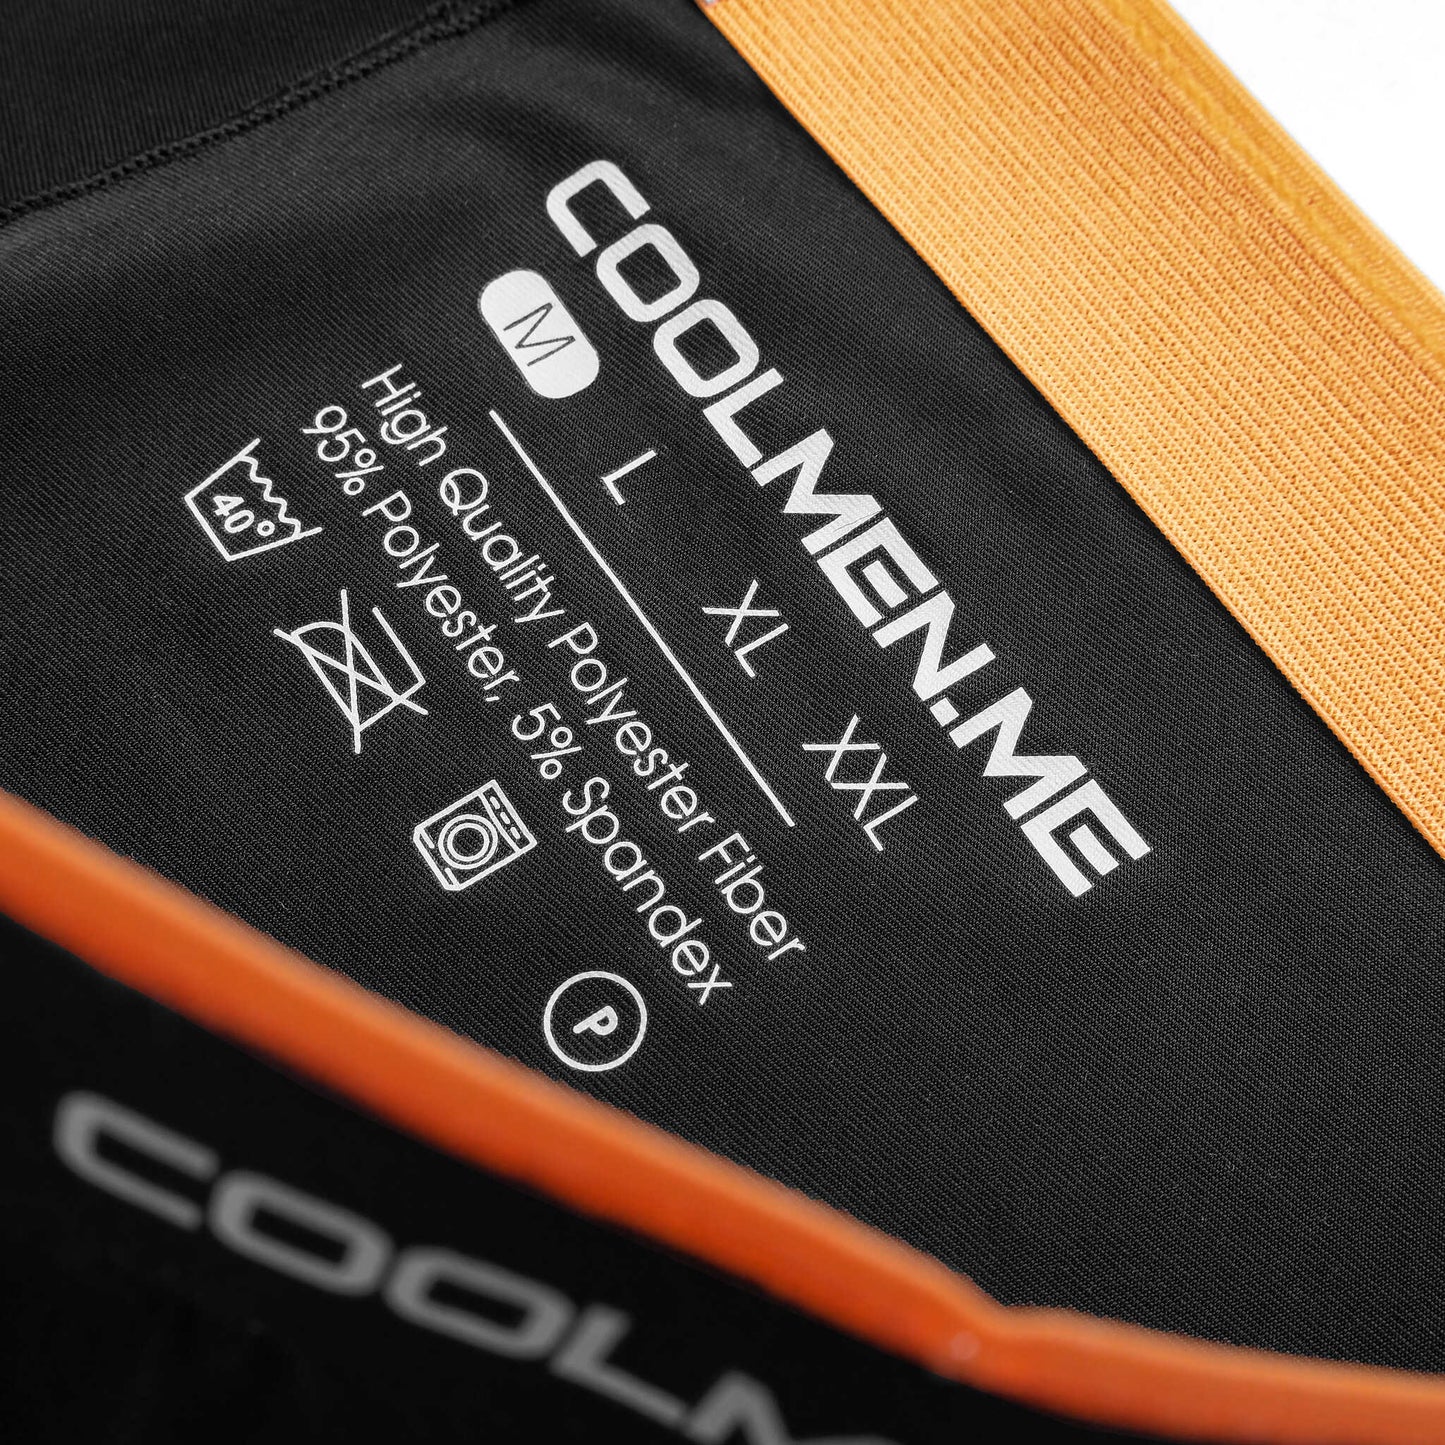 CoolMen Invisible Underwear - Combo 3 Packs (New Product)